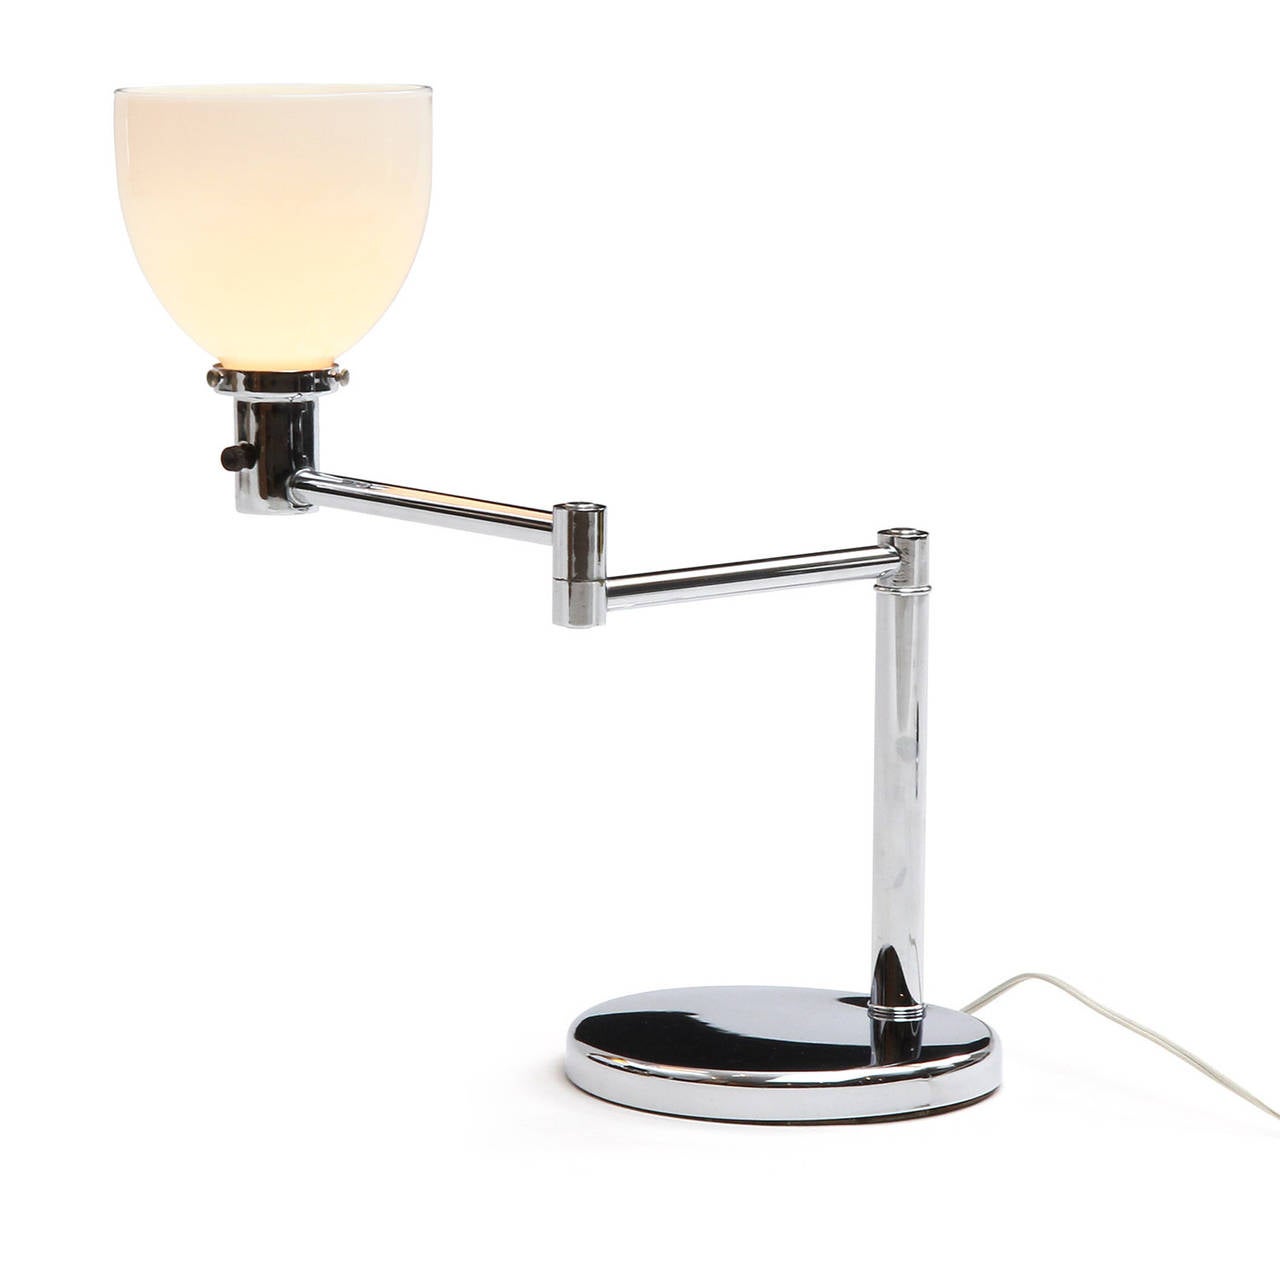 Mid-20th Century Swing Arm Lamps by Nessen